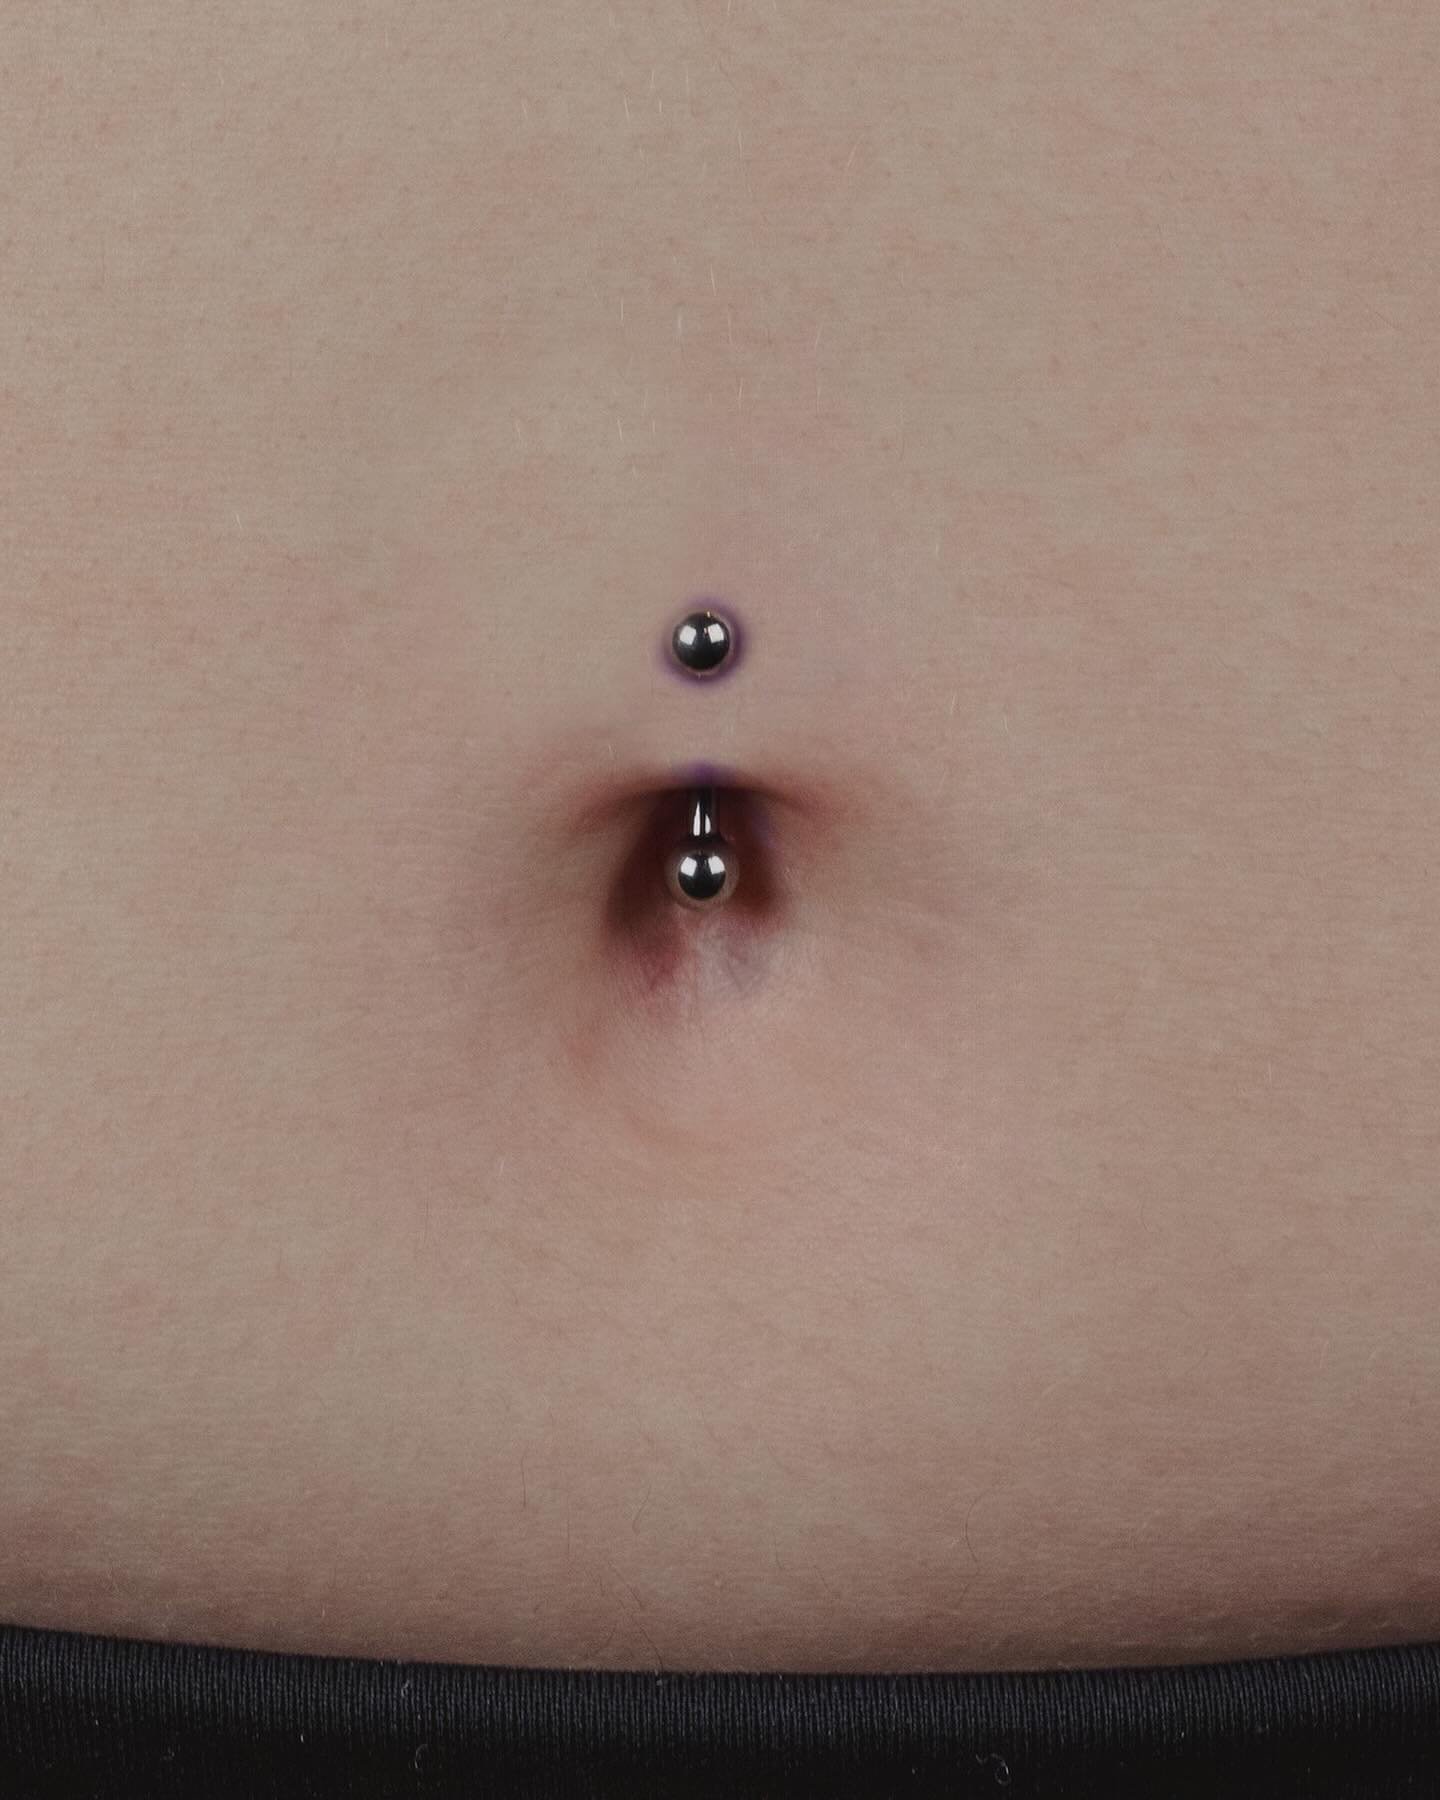 THE⚔️
 
FINAL HOUR 
 
A fresh navel with a classic threaded curve for this client, performed by Tanner⚡️
⠀⠀⠀⠀⠀⠀⠀⠀⠀
~  @research.chemicals ~ 
⠀⠀⠀⠀⠀⠀⠀⠀
⠀⠀⠀⠀⠀⠀⠀⠀⠀
⠀⠀⠀⠀⠀⠀⠀⠀⠀
⠀⠀⠀⠀⠀⠀⠀⠀⠀
📸@mrbattle
~book your appointment🖋
~link in bio
&bull;
&bull;
&bull;